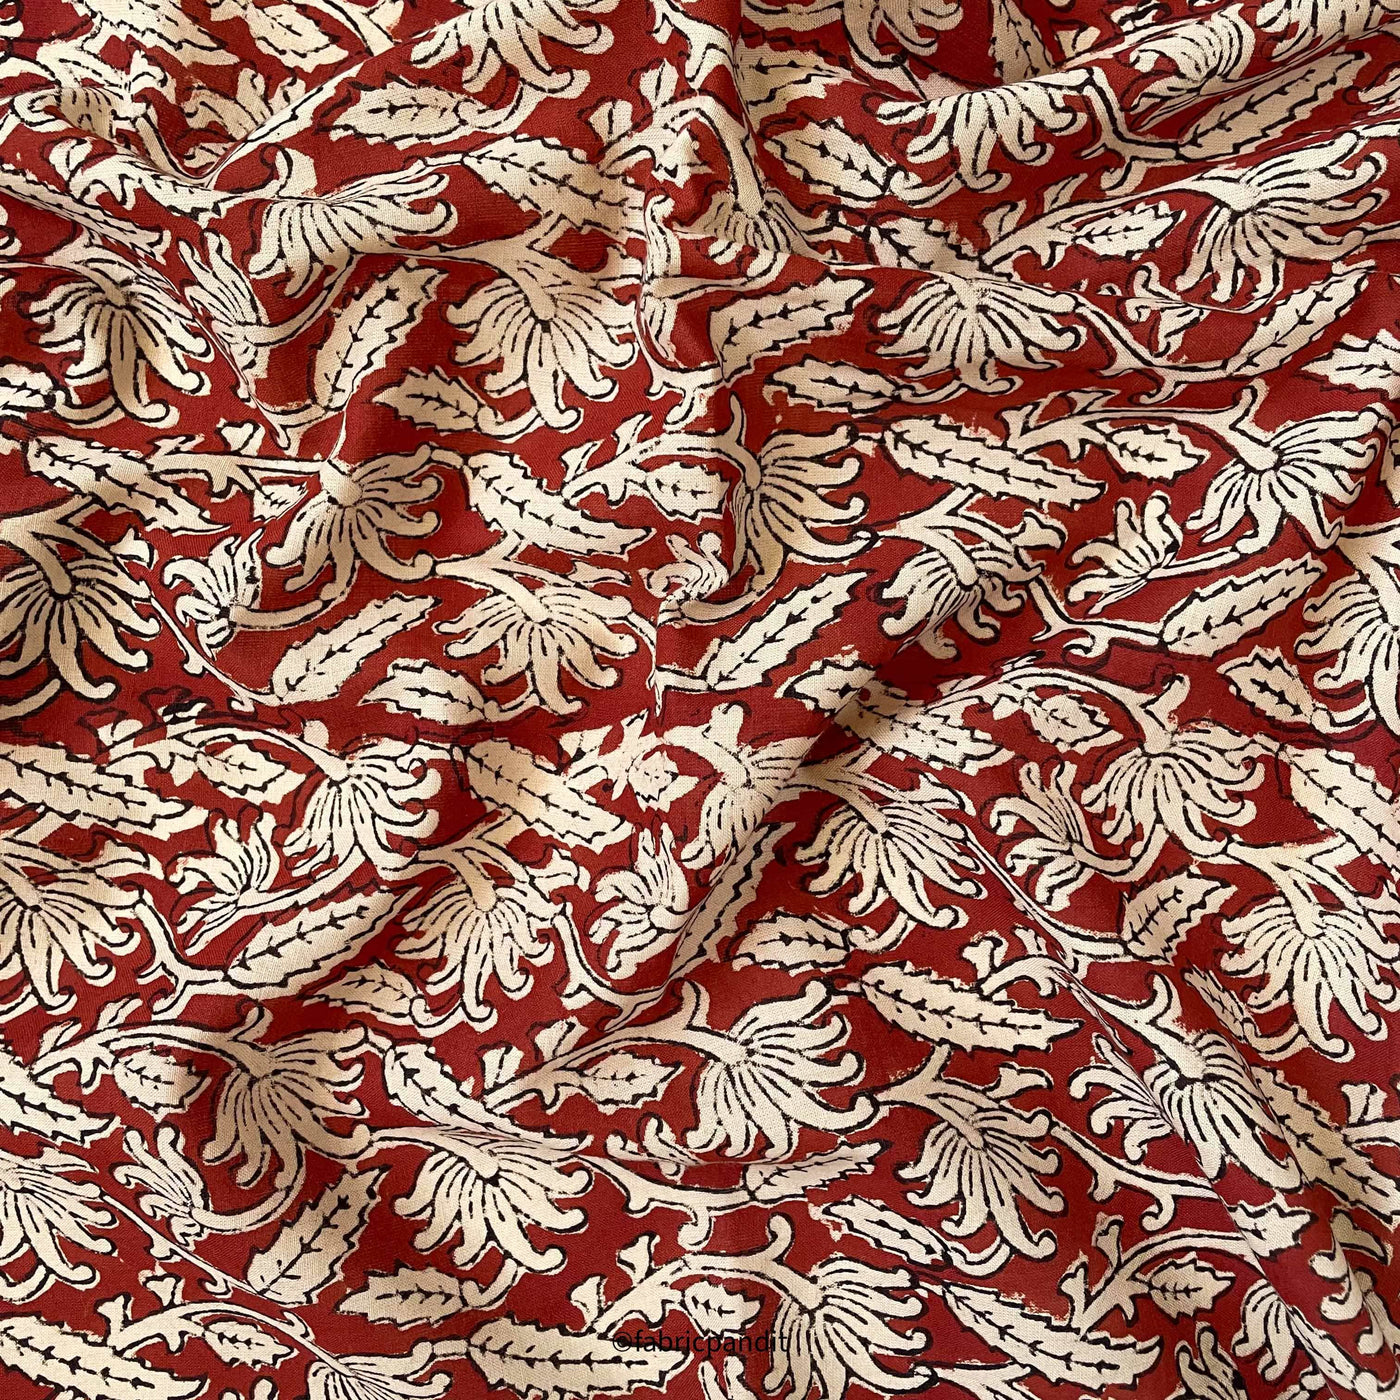 Hand Block Printed Cotton Fabric Cut Piece (CUT PIECE) Dusty Red & Beige Egyptial Floral Jaal Authentic Bagru Hand Block Printed Pure Cotton Fabric (Width 42 inches)